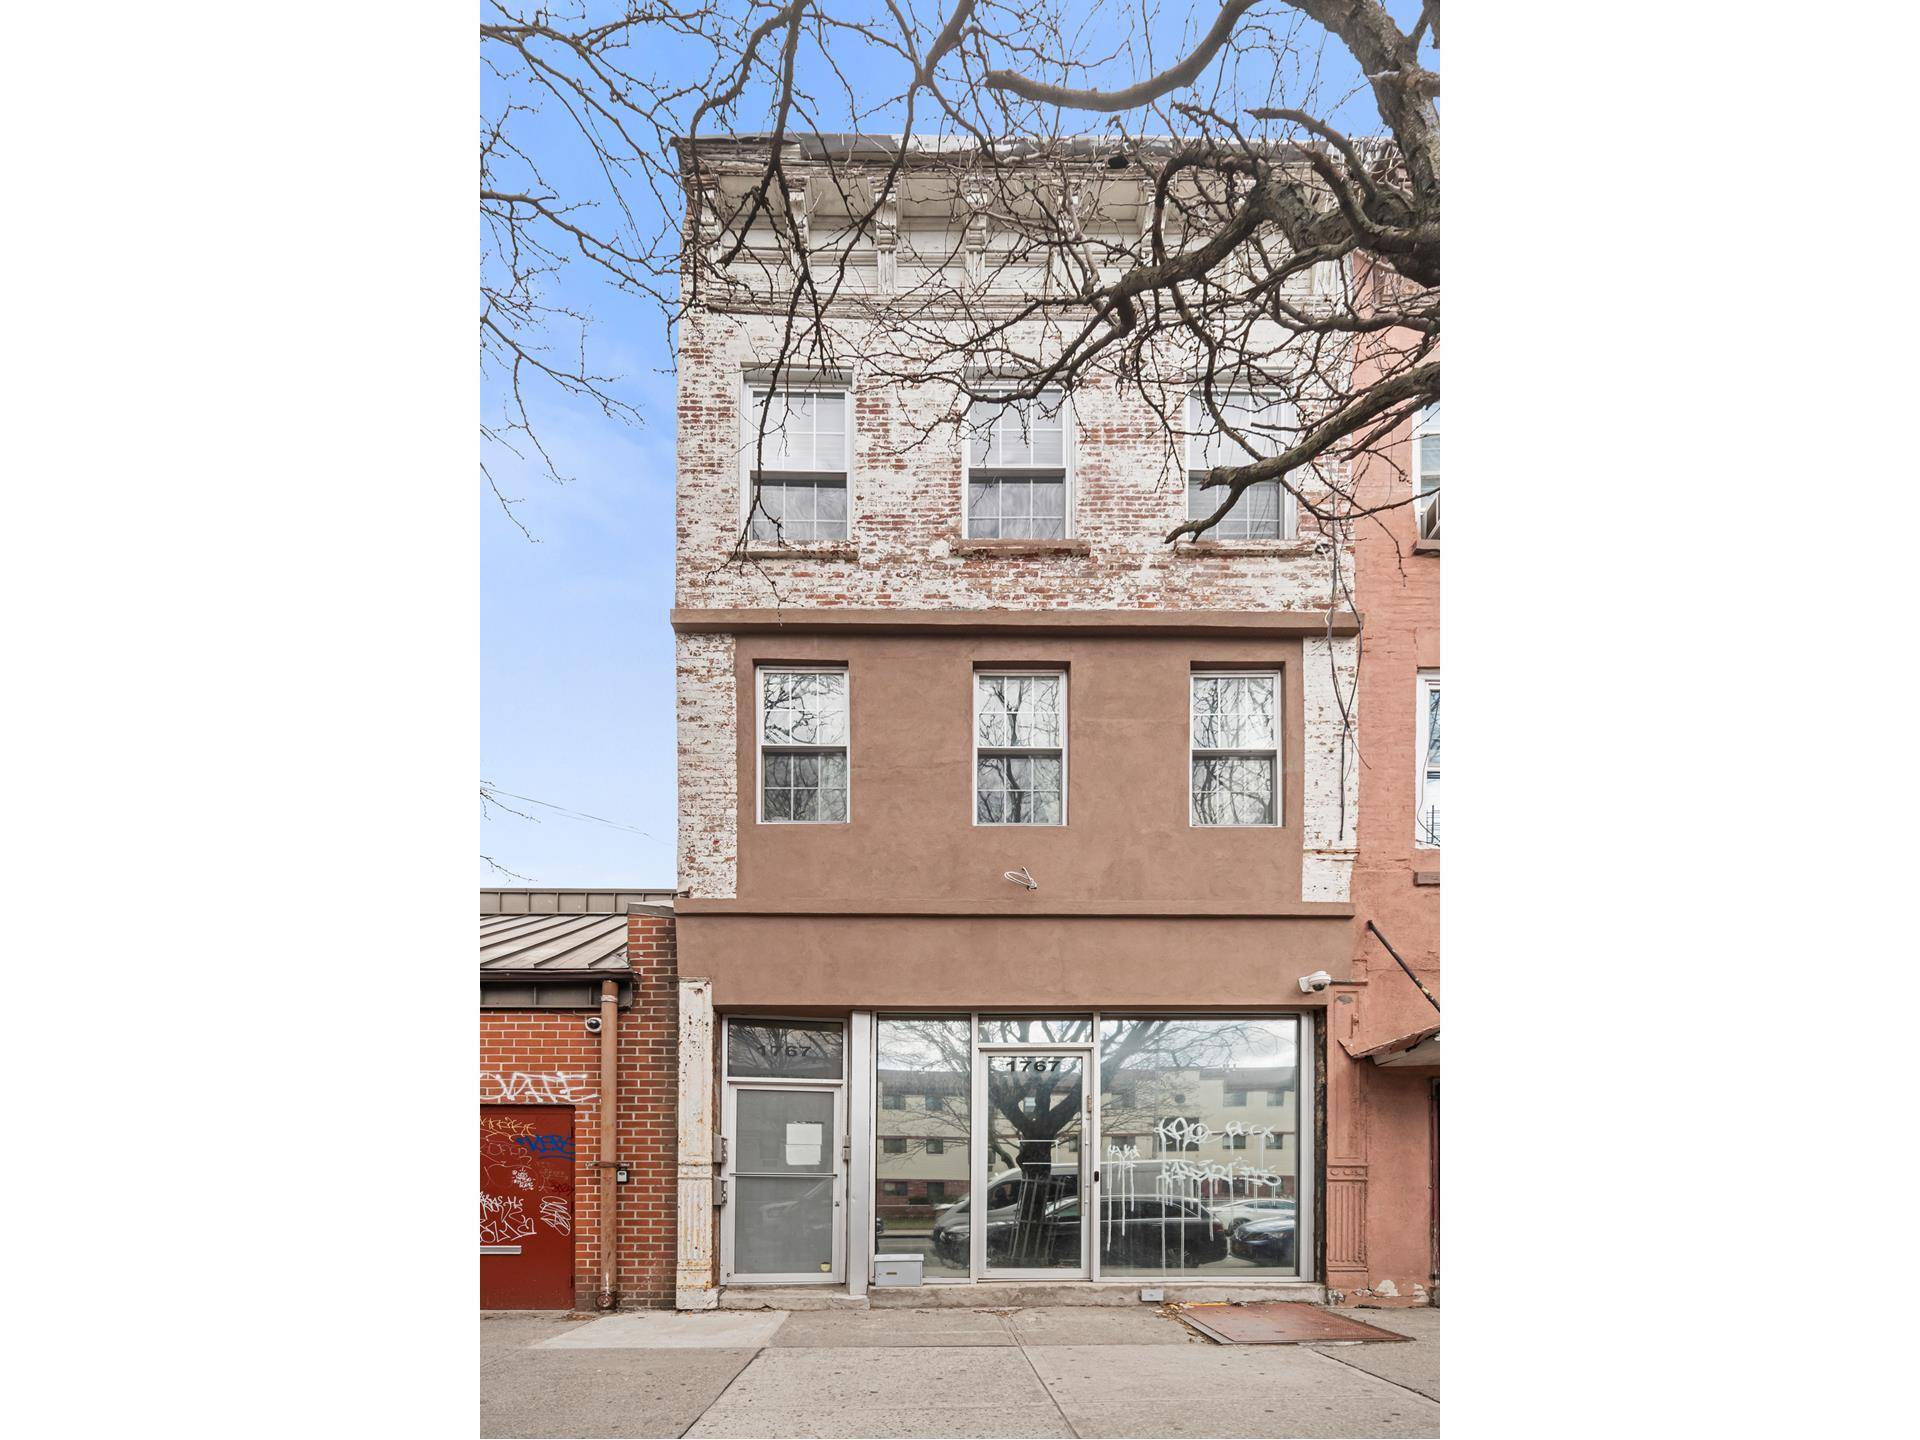 Welcome to 1767 Fulton Street, a 2 family property with additional commercial space that offers the perfect blend of two worlds.